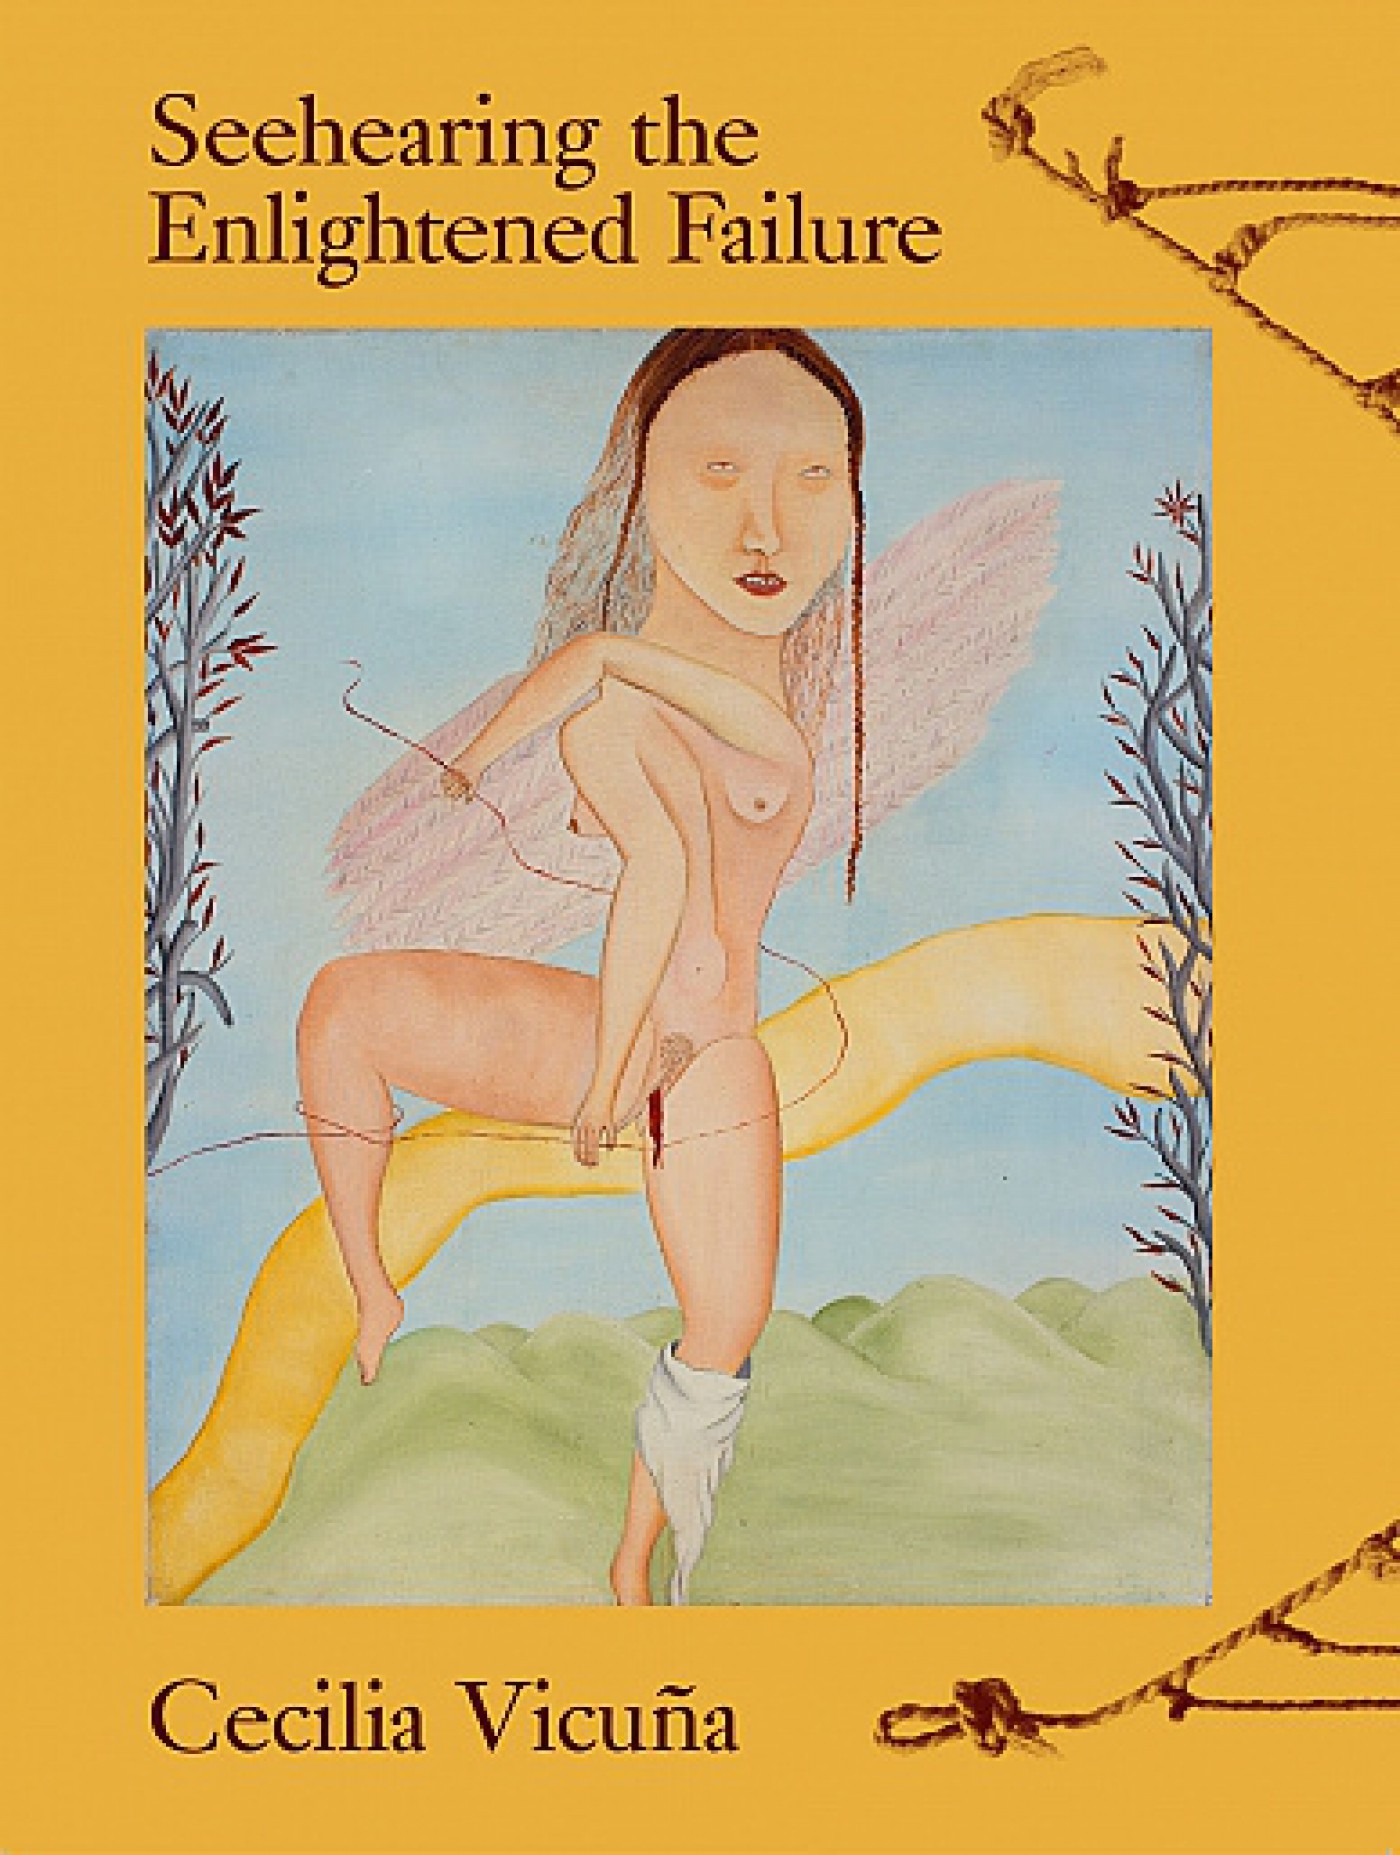 Book cover featuring image by Cecilia Vicuña showing a fairy-like figure, nude, with apparent menstrual blood.